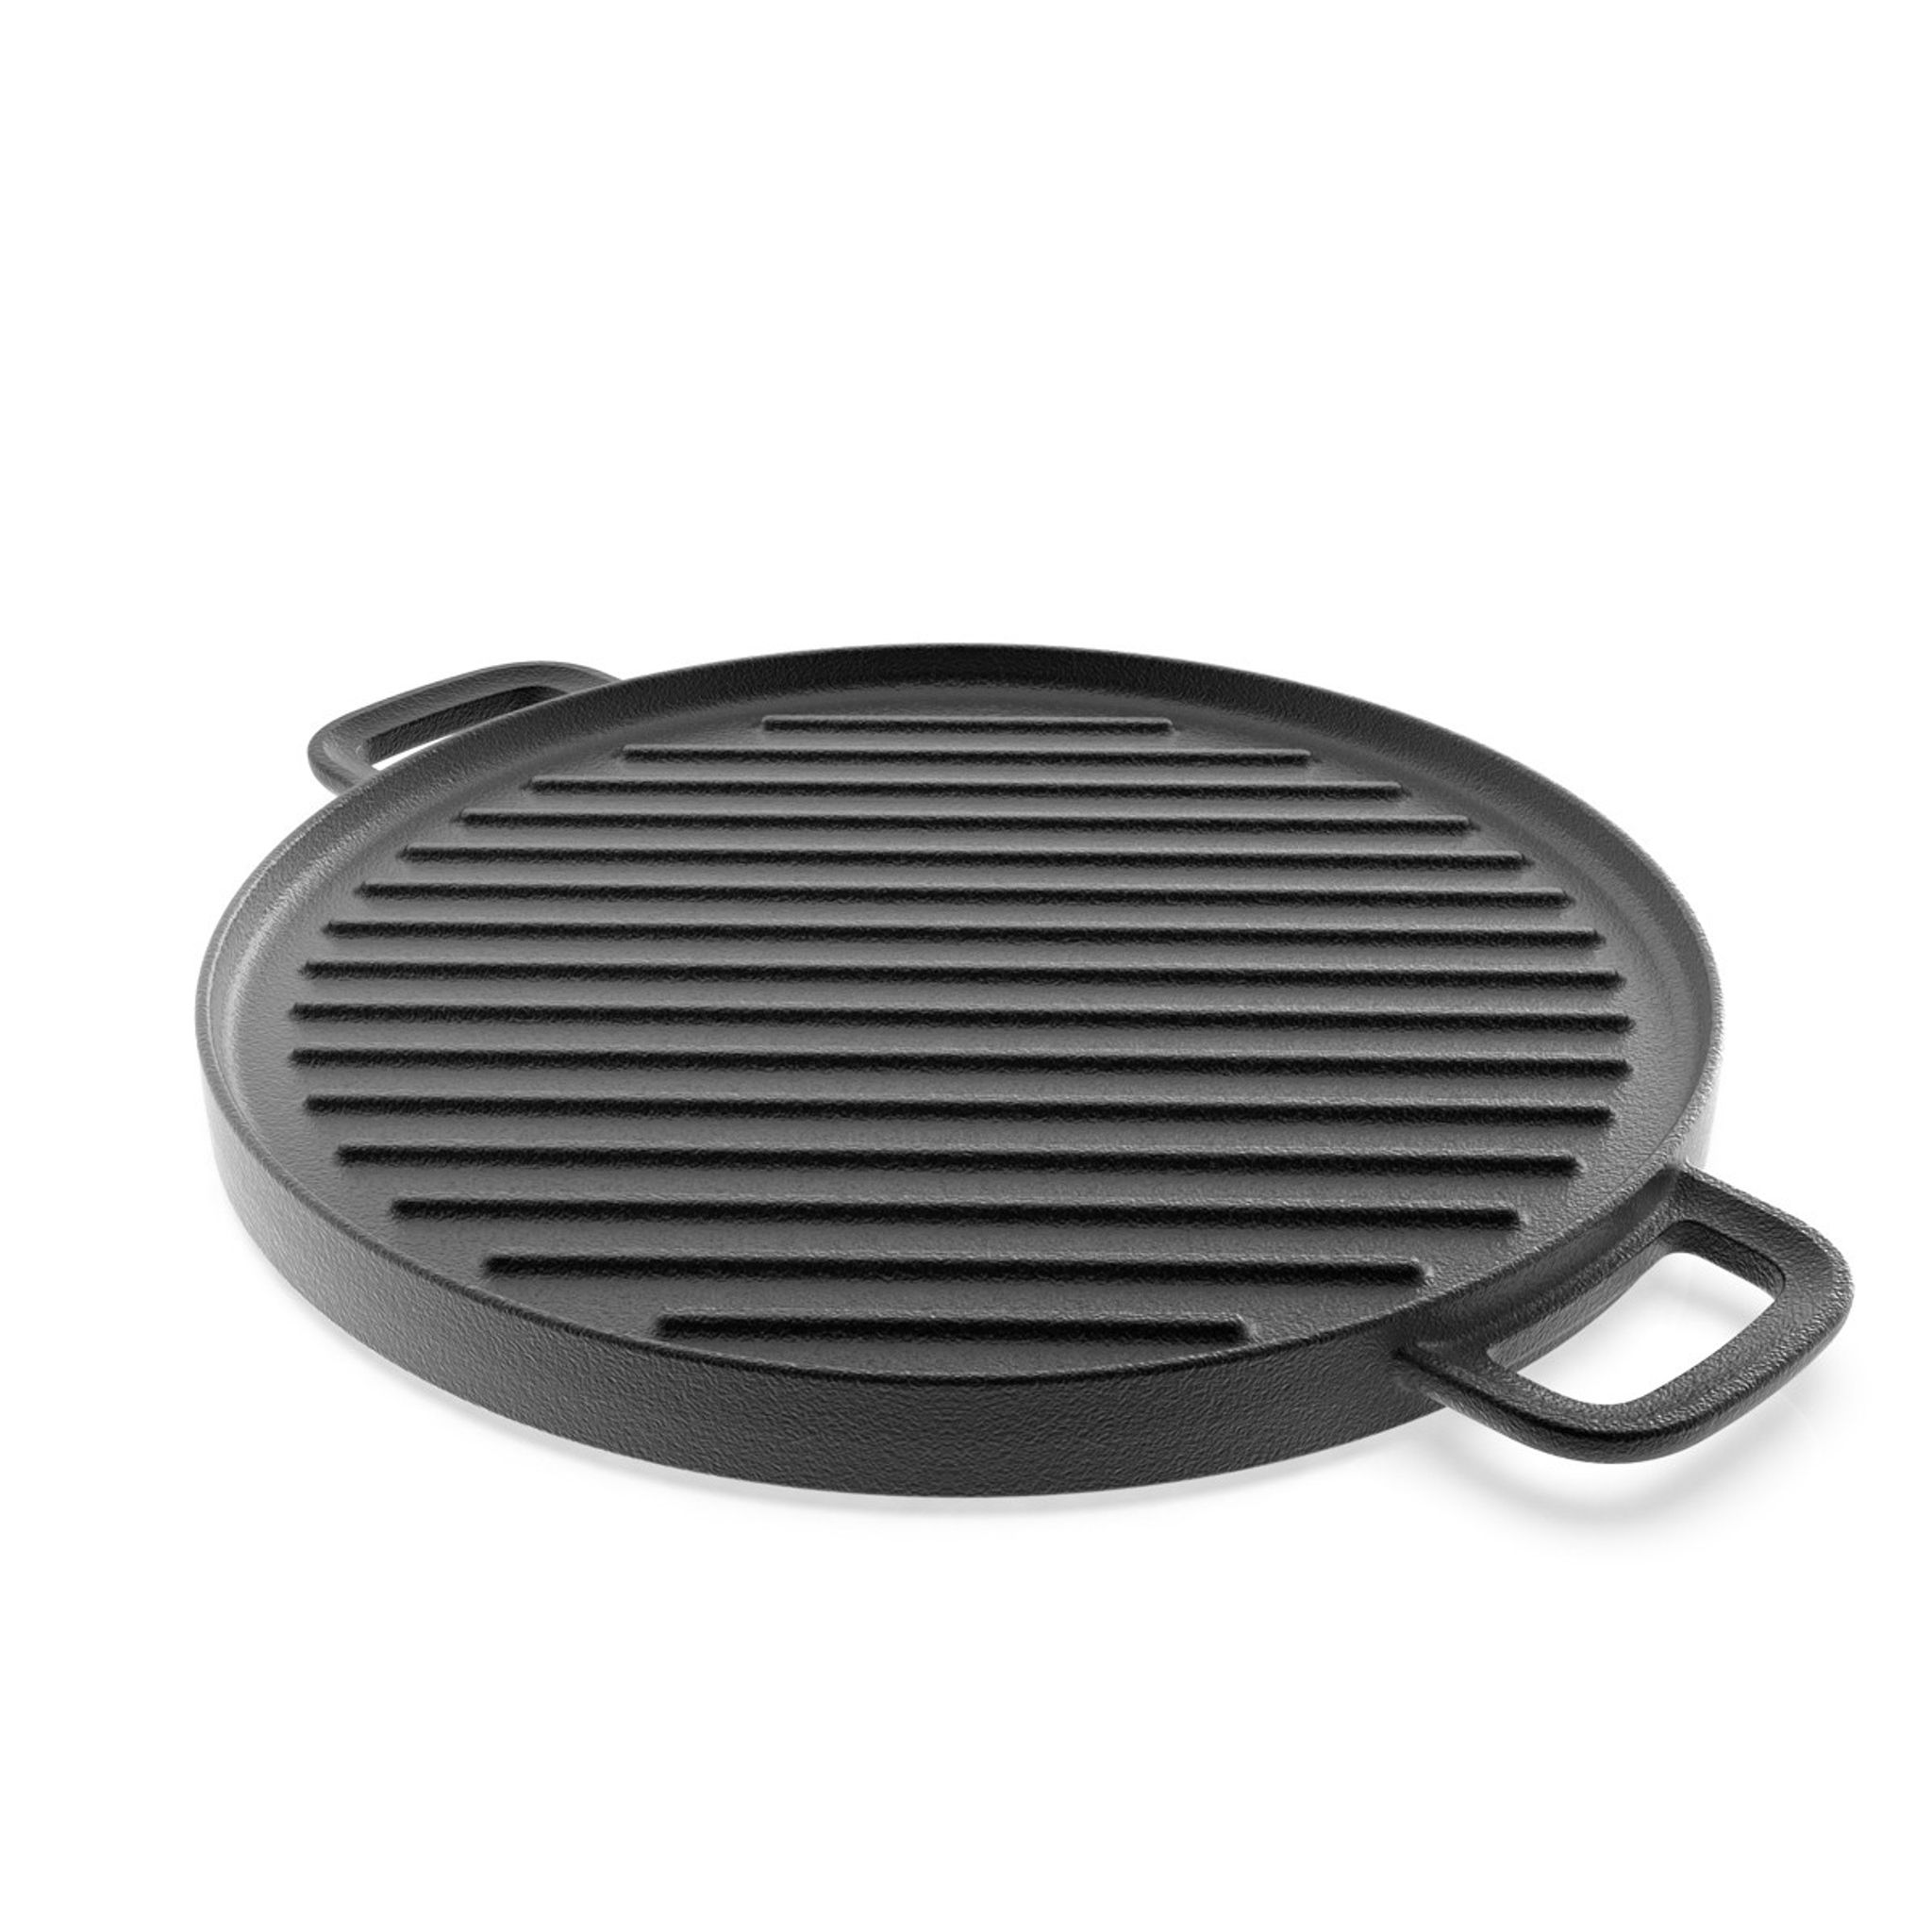 Double-sided grilling pan MASSIVE ø 30 cm